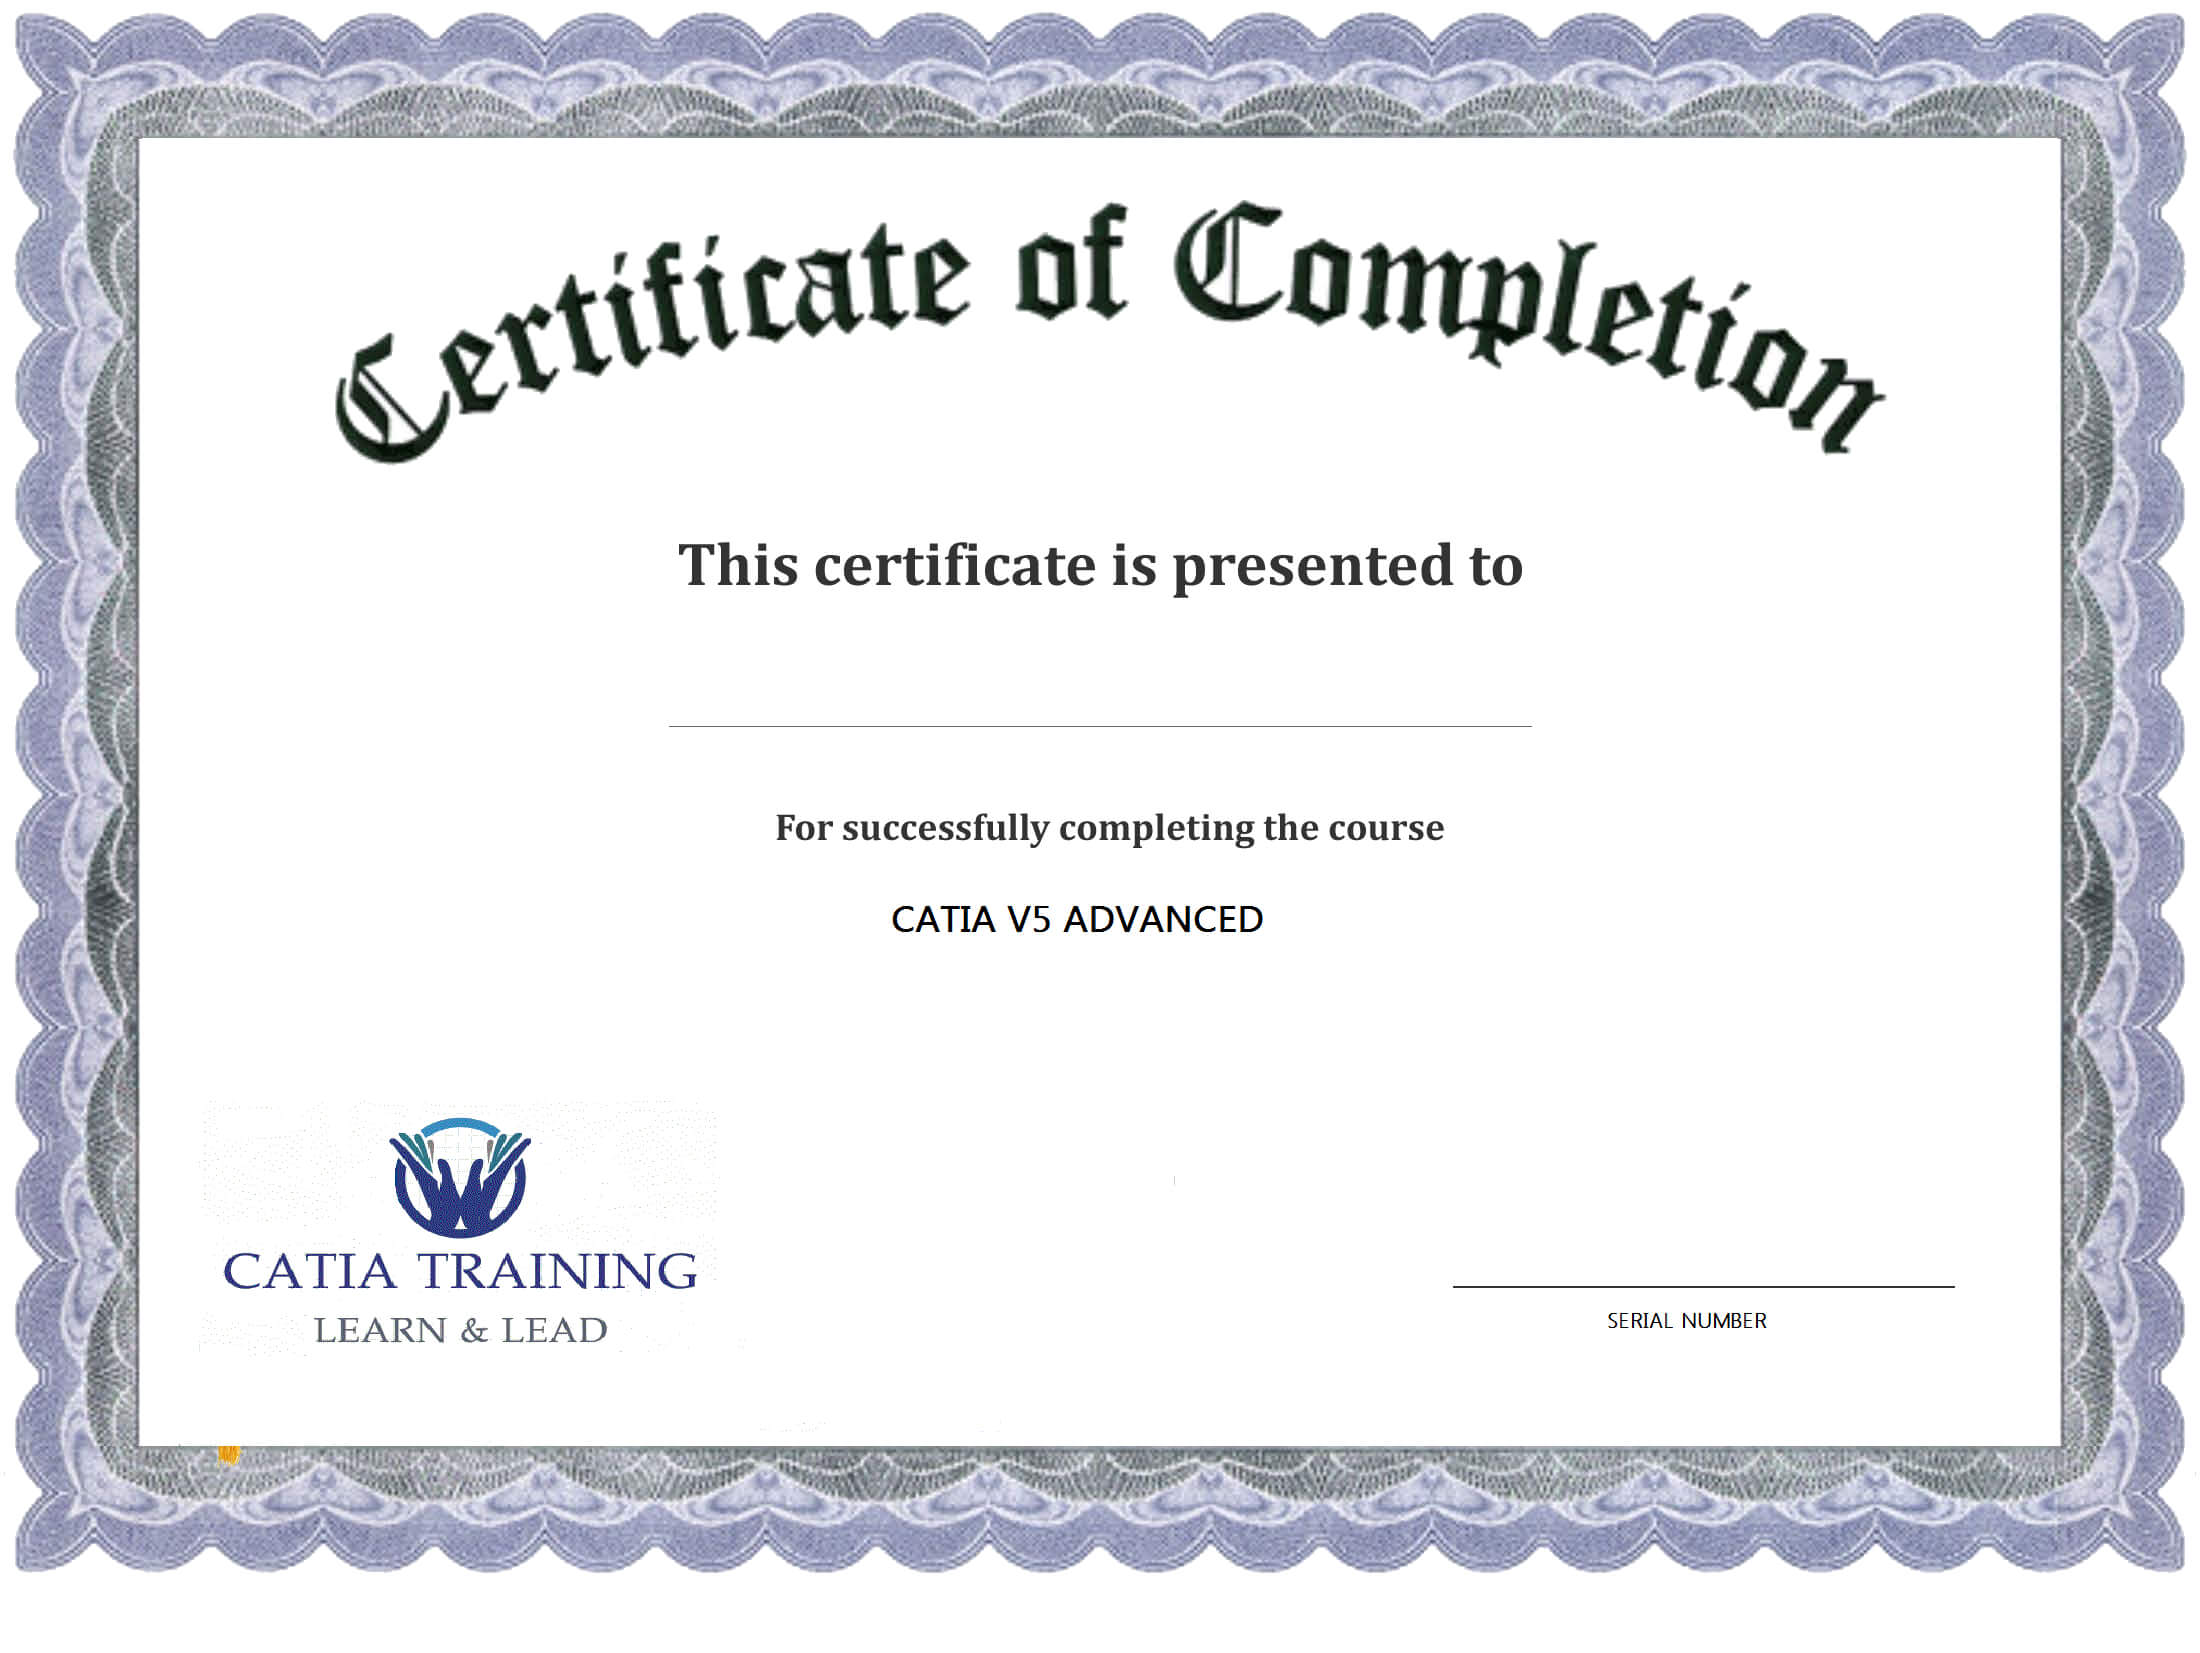 🥰free Printable Certificate Of Participation Templates (Cop)🥰 Pertaining To Certificate Of Participation Template Pdf